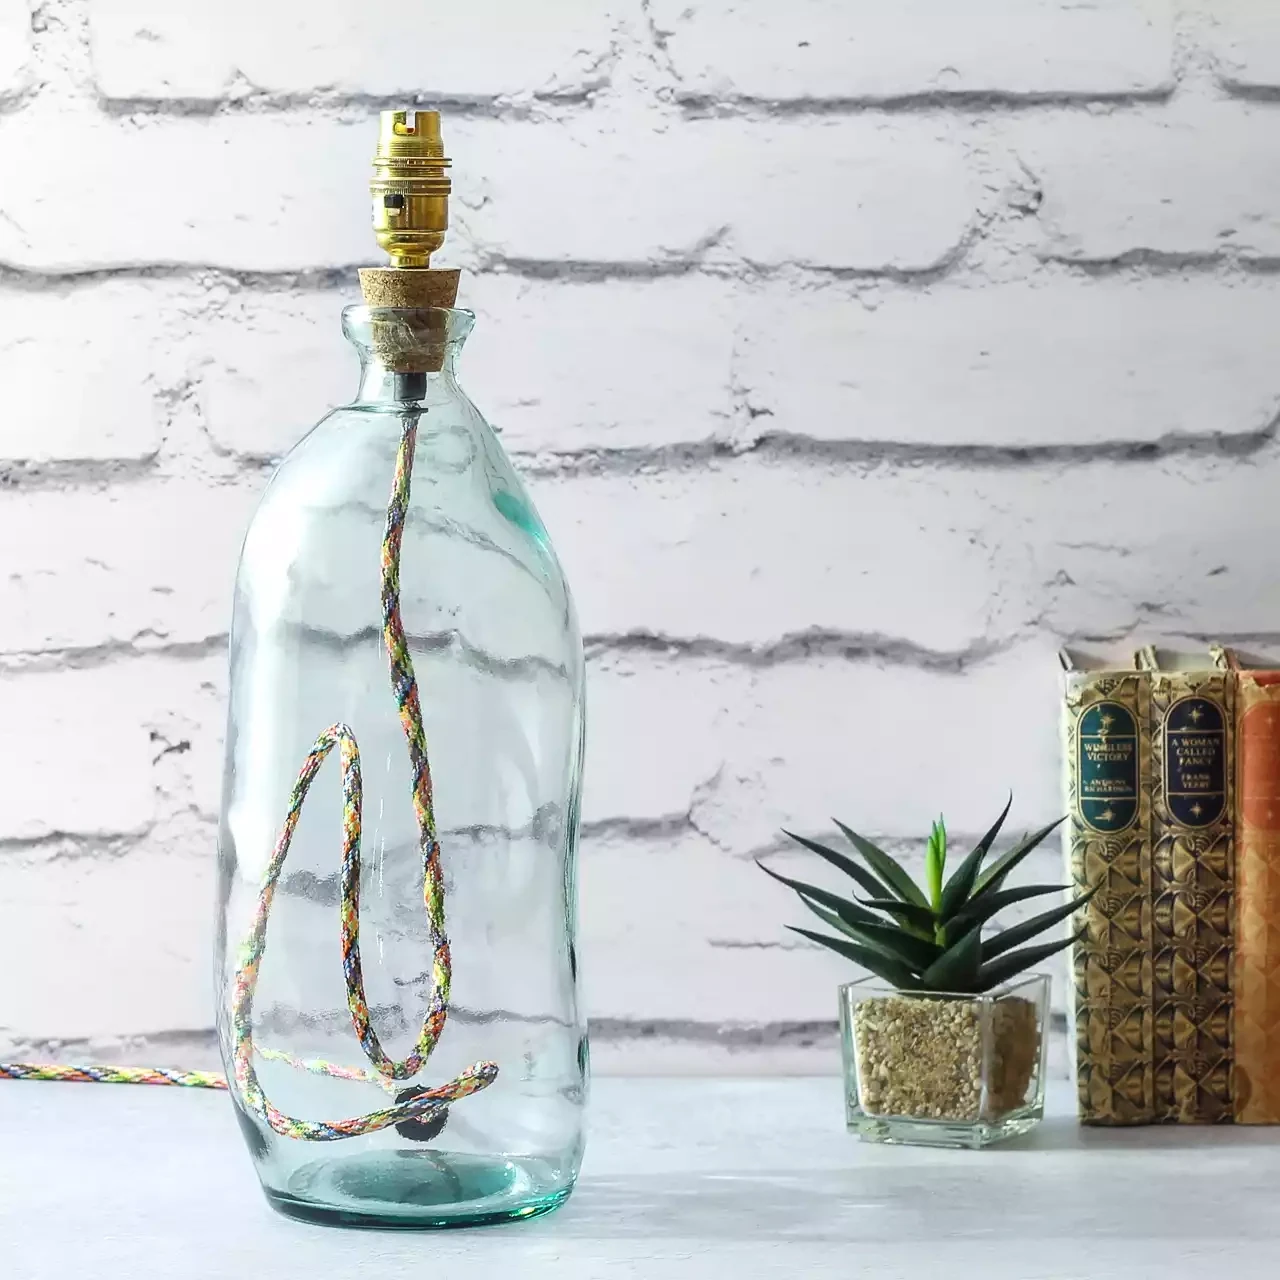 Simplicity Recycled Glass Bottle Lamp Base - Tall and Slim - Natural With Multi-coloured Cord by Jarapa